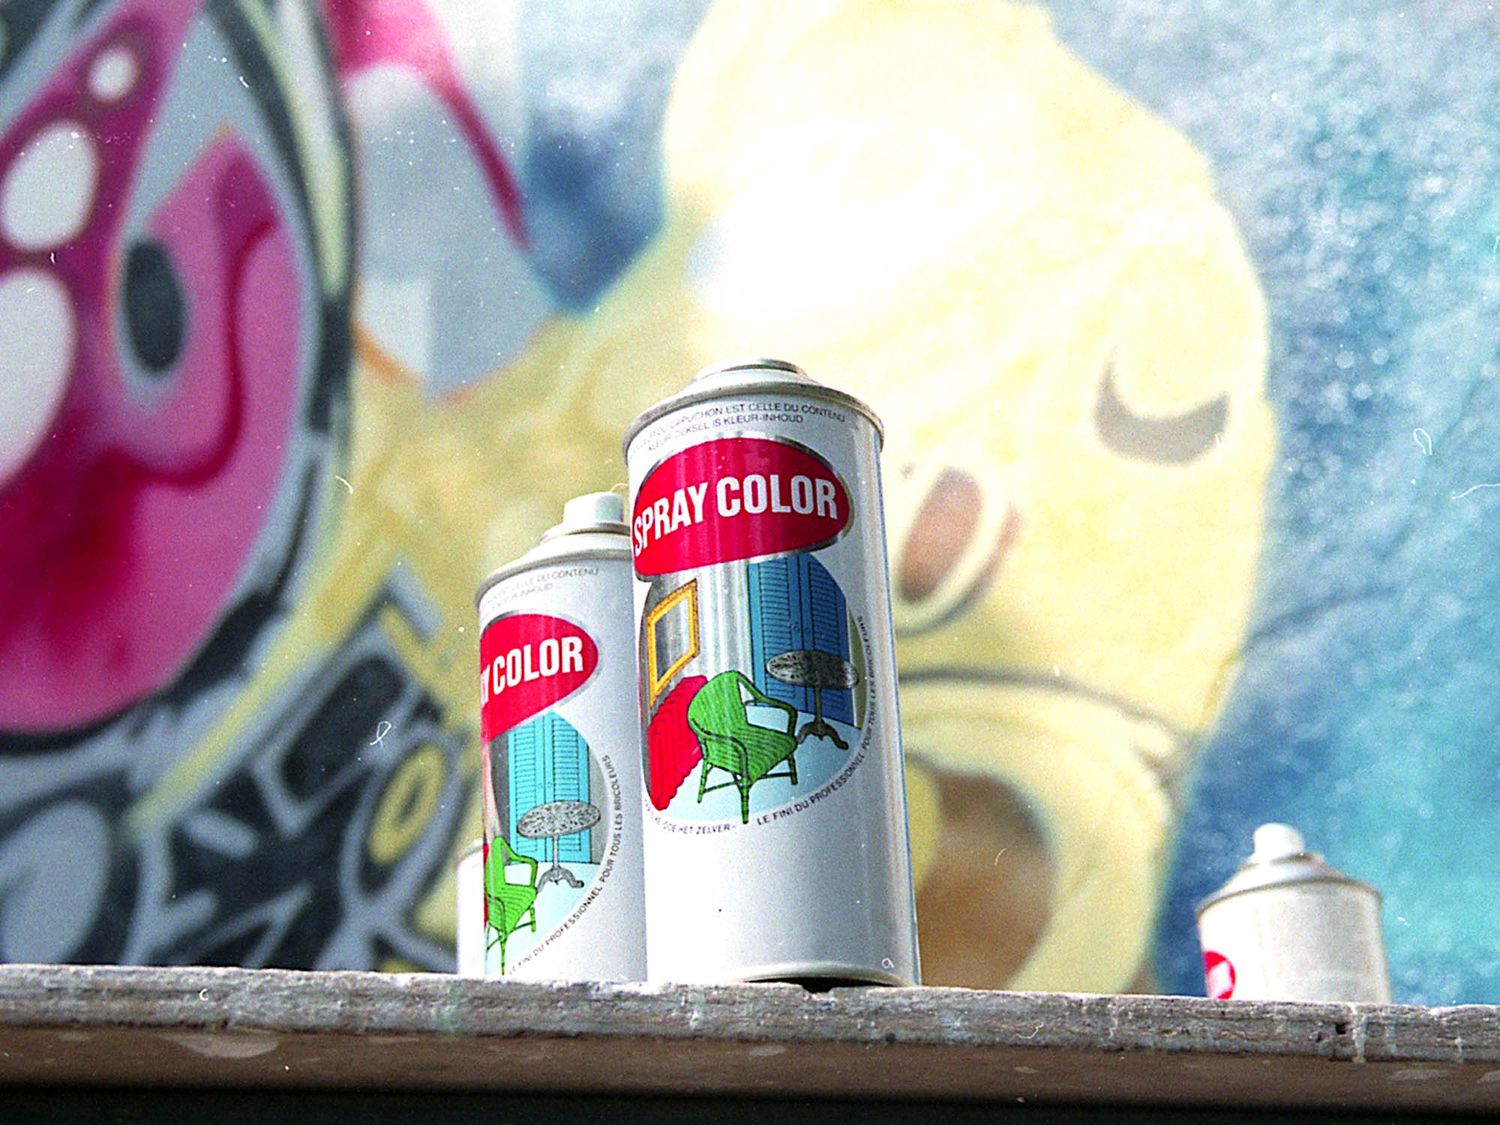 The advent of the spray can as a new creative medium by graffiti artists was initially perceived as a degradation by the public opinion before it could be considered art (©Paris Tonkar).